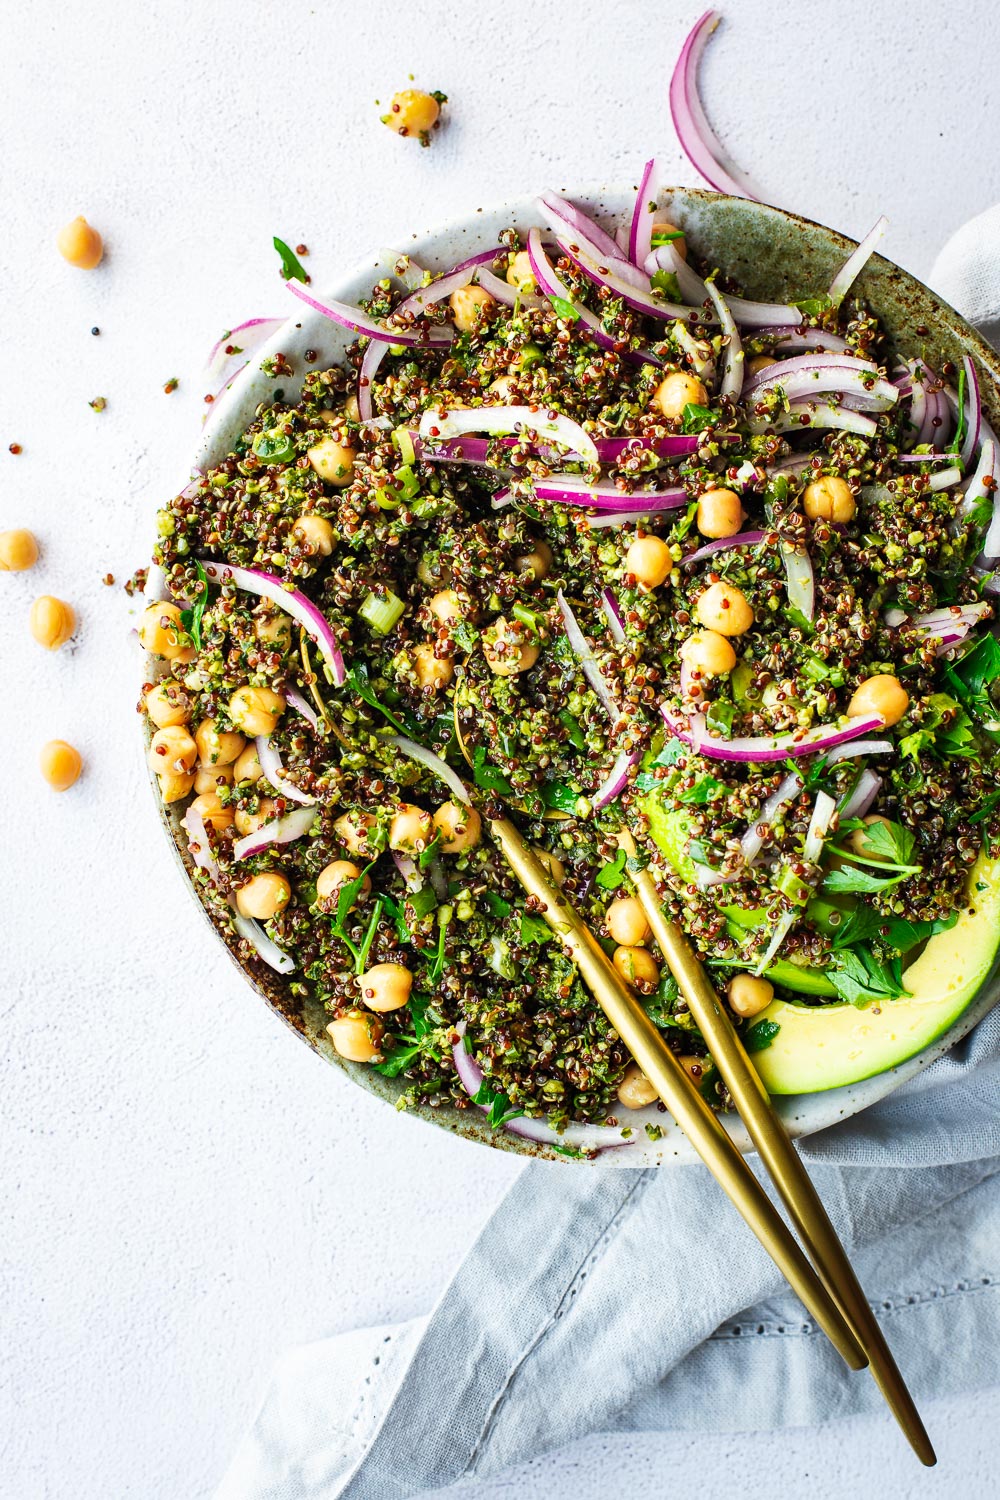 Mixed quinoa and kale pesto salad with chickpeas, red onions and avocado with chickpeas spilling over the side of the bowl.